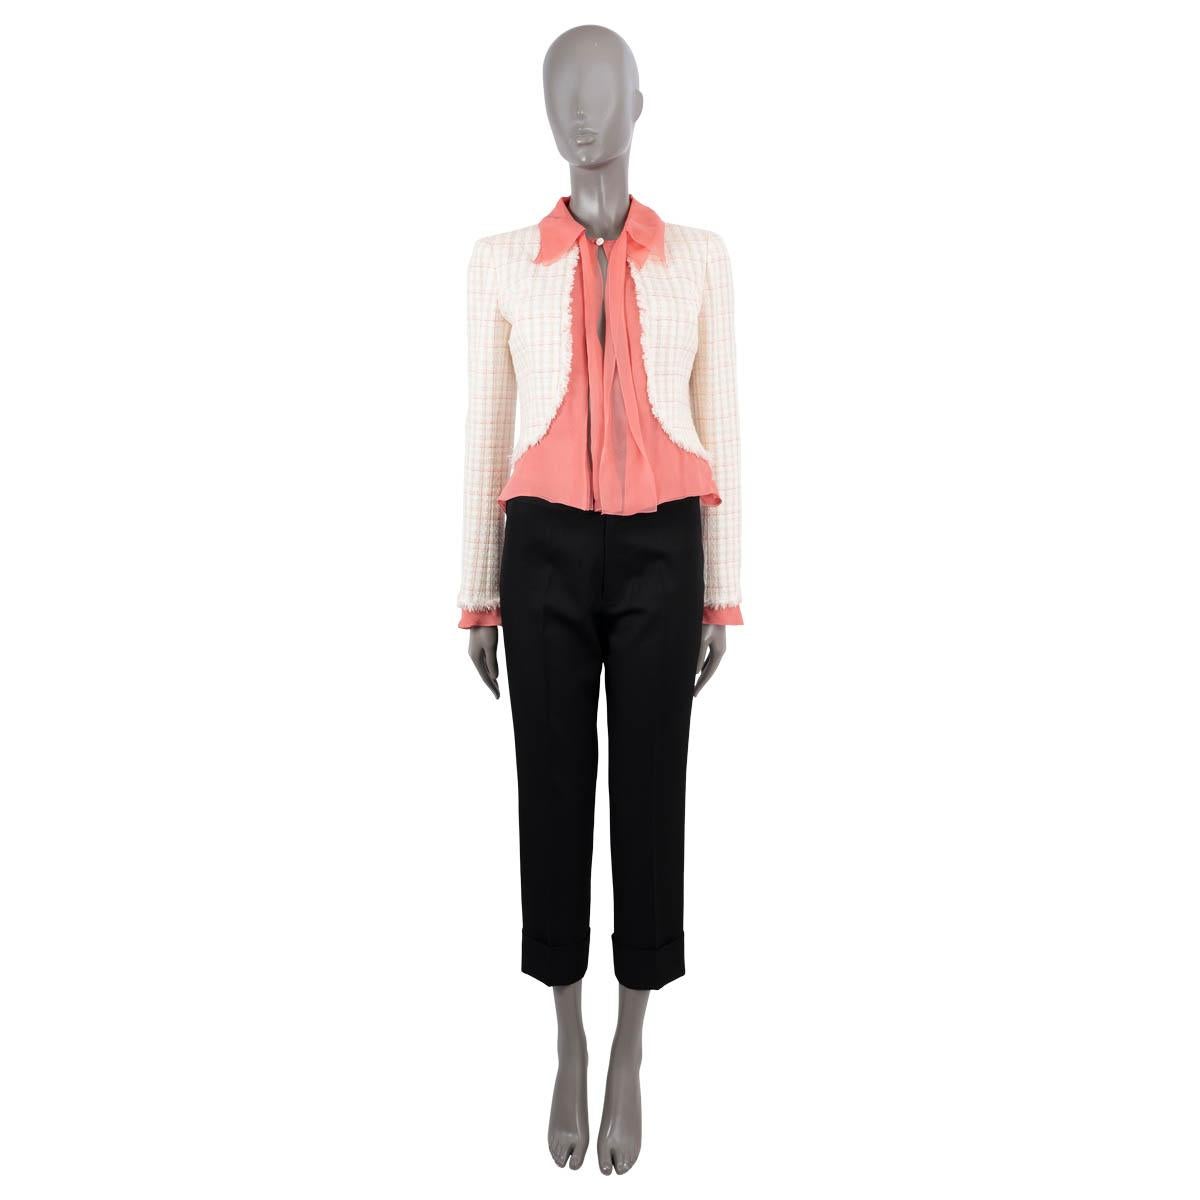 100% authentic Chanel puss-bow tweed jacket in ivory, coral, red and mint green wool (36%), nylon (34%), viscose (16%) and cotton (14%). Features coral silk chiffon panels, collar and cuffs. Closes with one button on the front. Lined in ivory silk